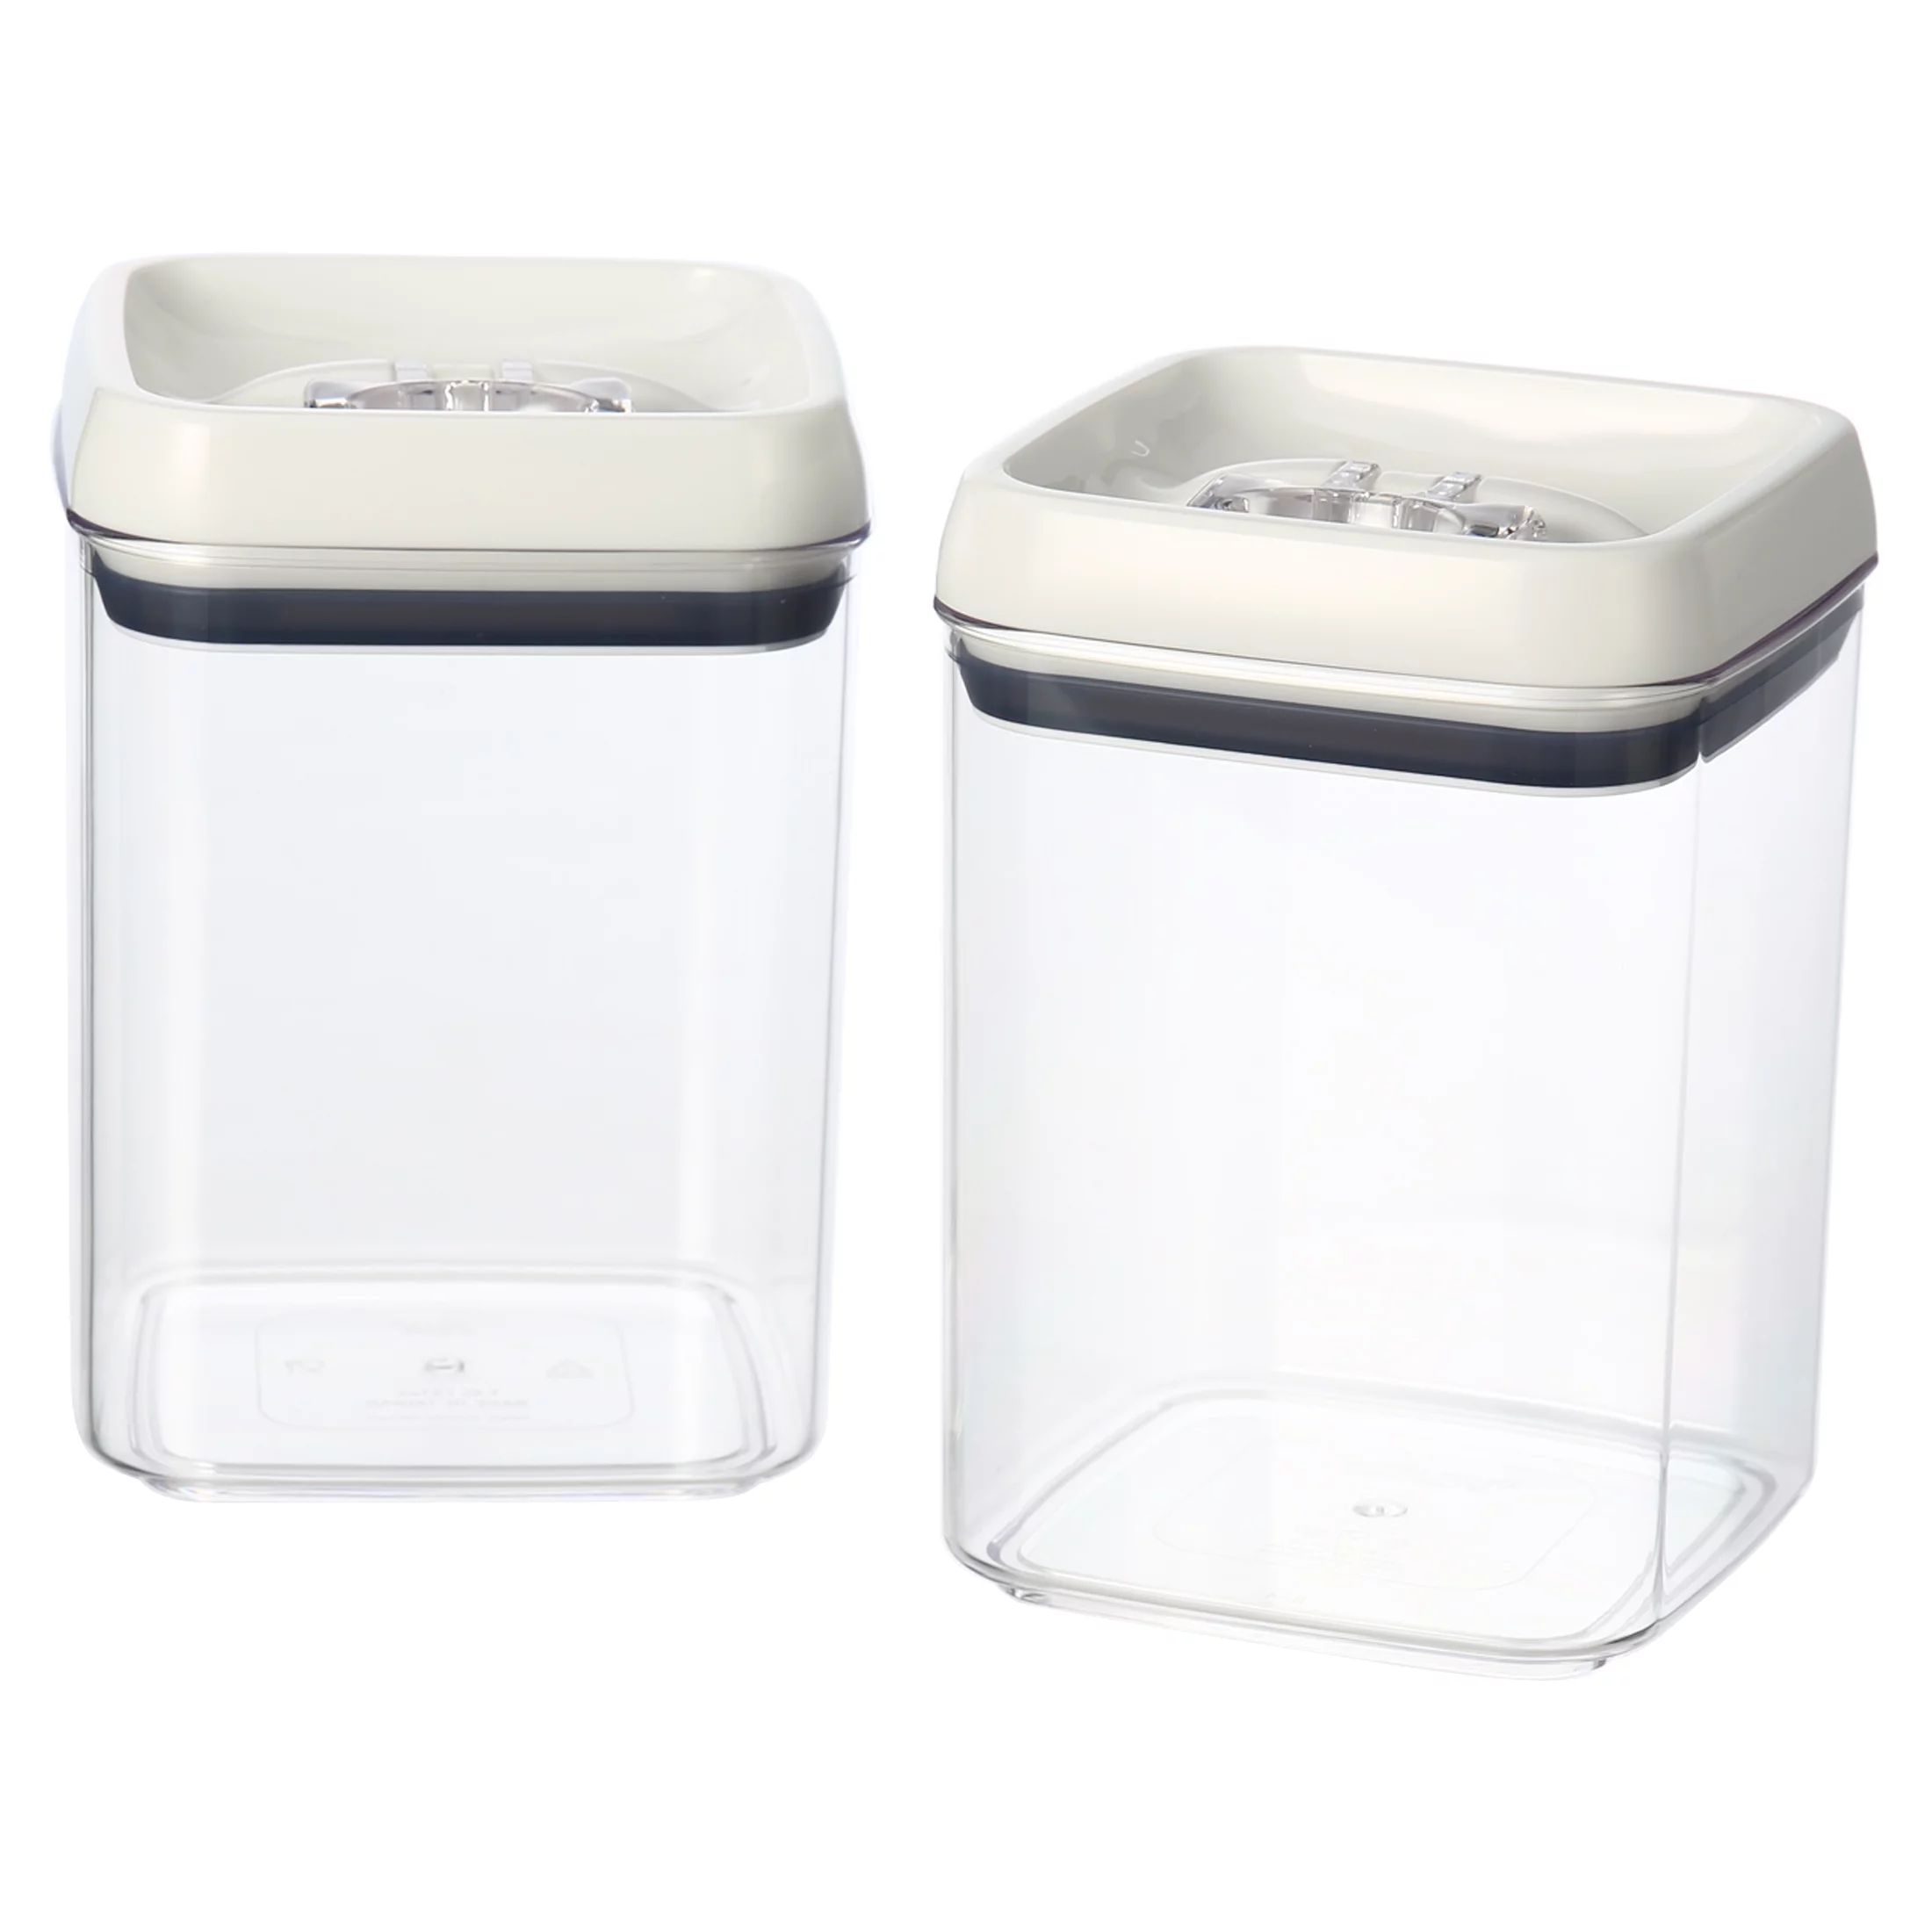 Better Homes & Gardens Flip-Tite® Square Food Storage Container, 7.5 Cup - Set of 2 | Walmart (US)